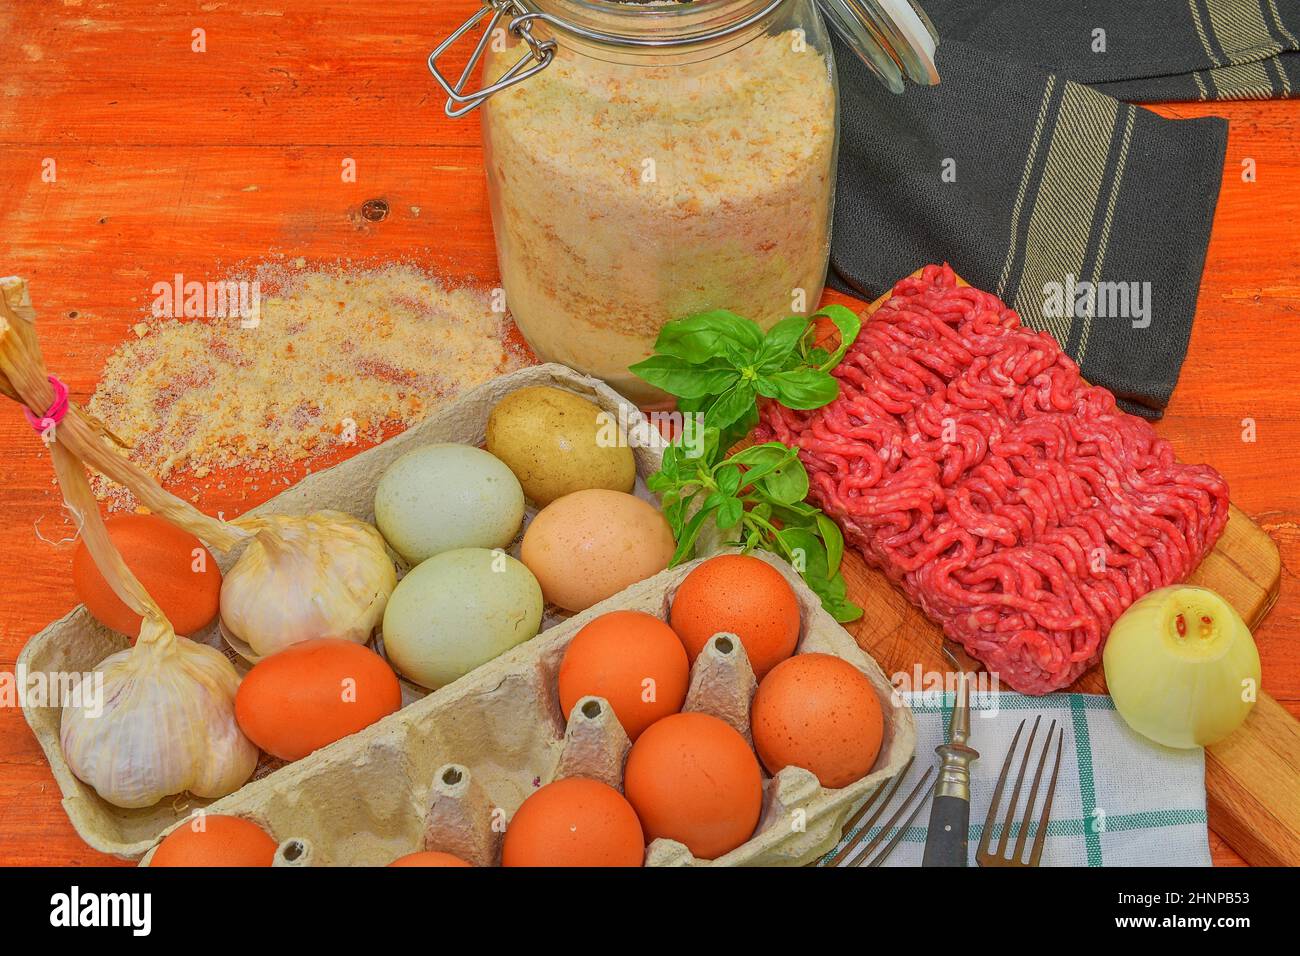 Mince. Ground meat with ingredients for cooking. Mixed minced meat ready to making burgers, fatty's, meaetballs. Food photography. Culinary concept. Minced meat recipe Stock Photo